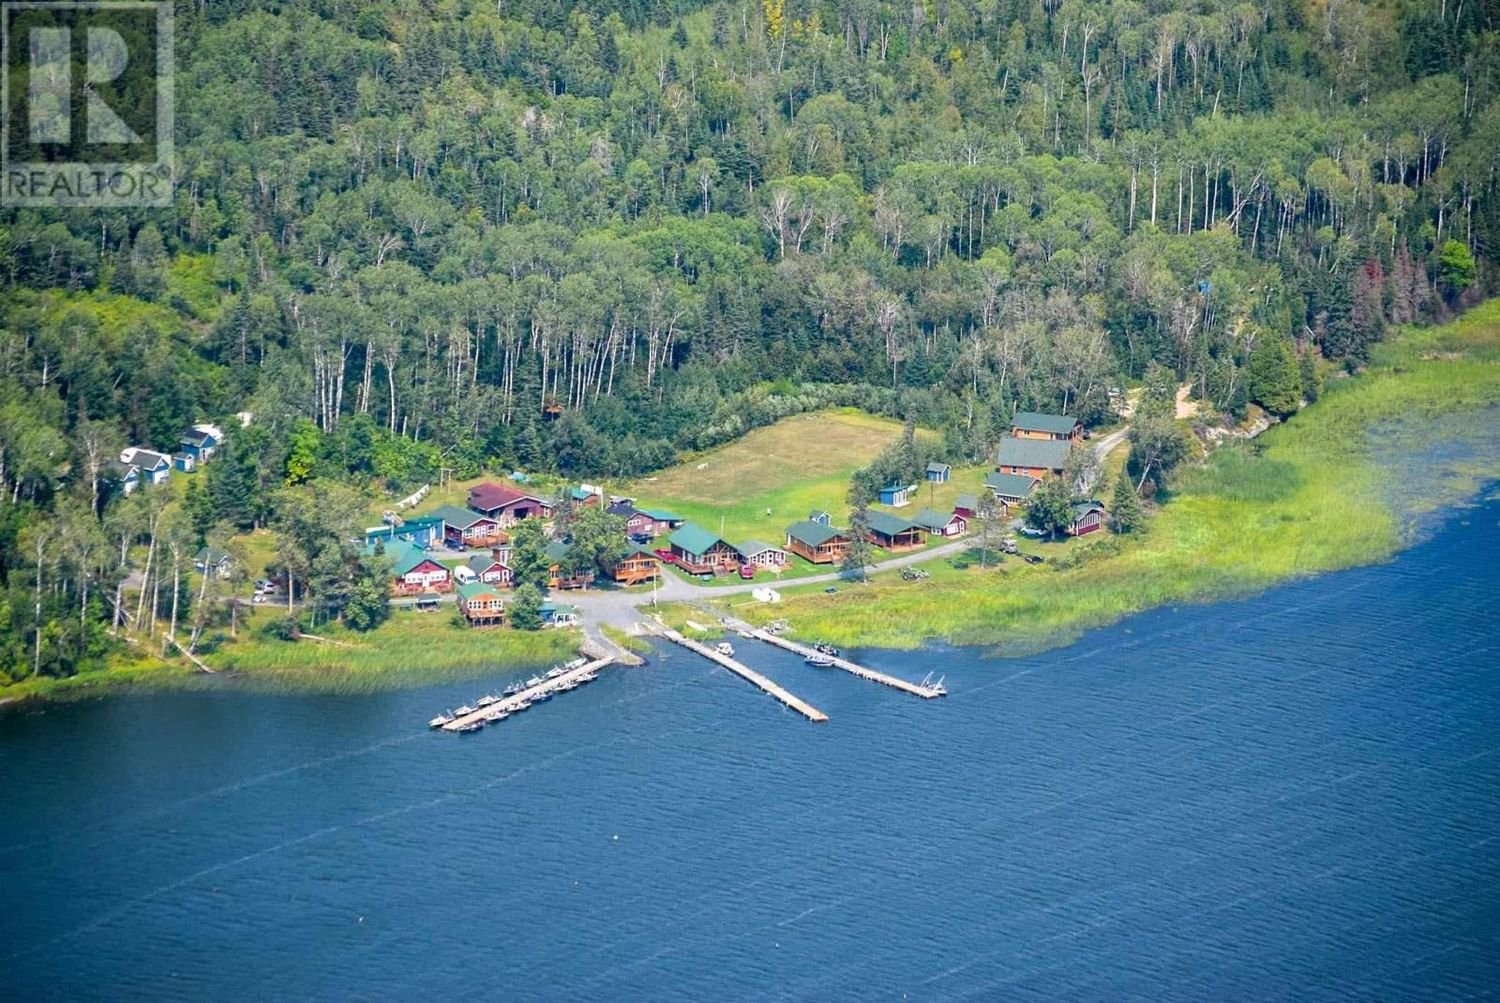 601 Witch Bay Camp road|Lake of the Wood Image 1